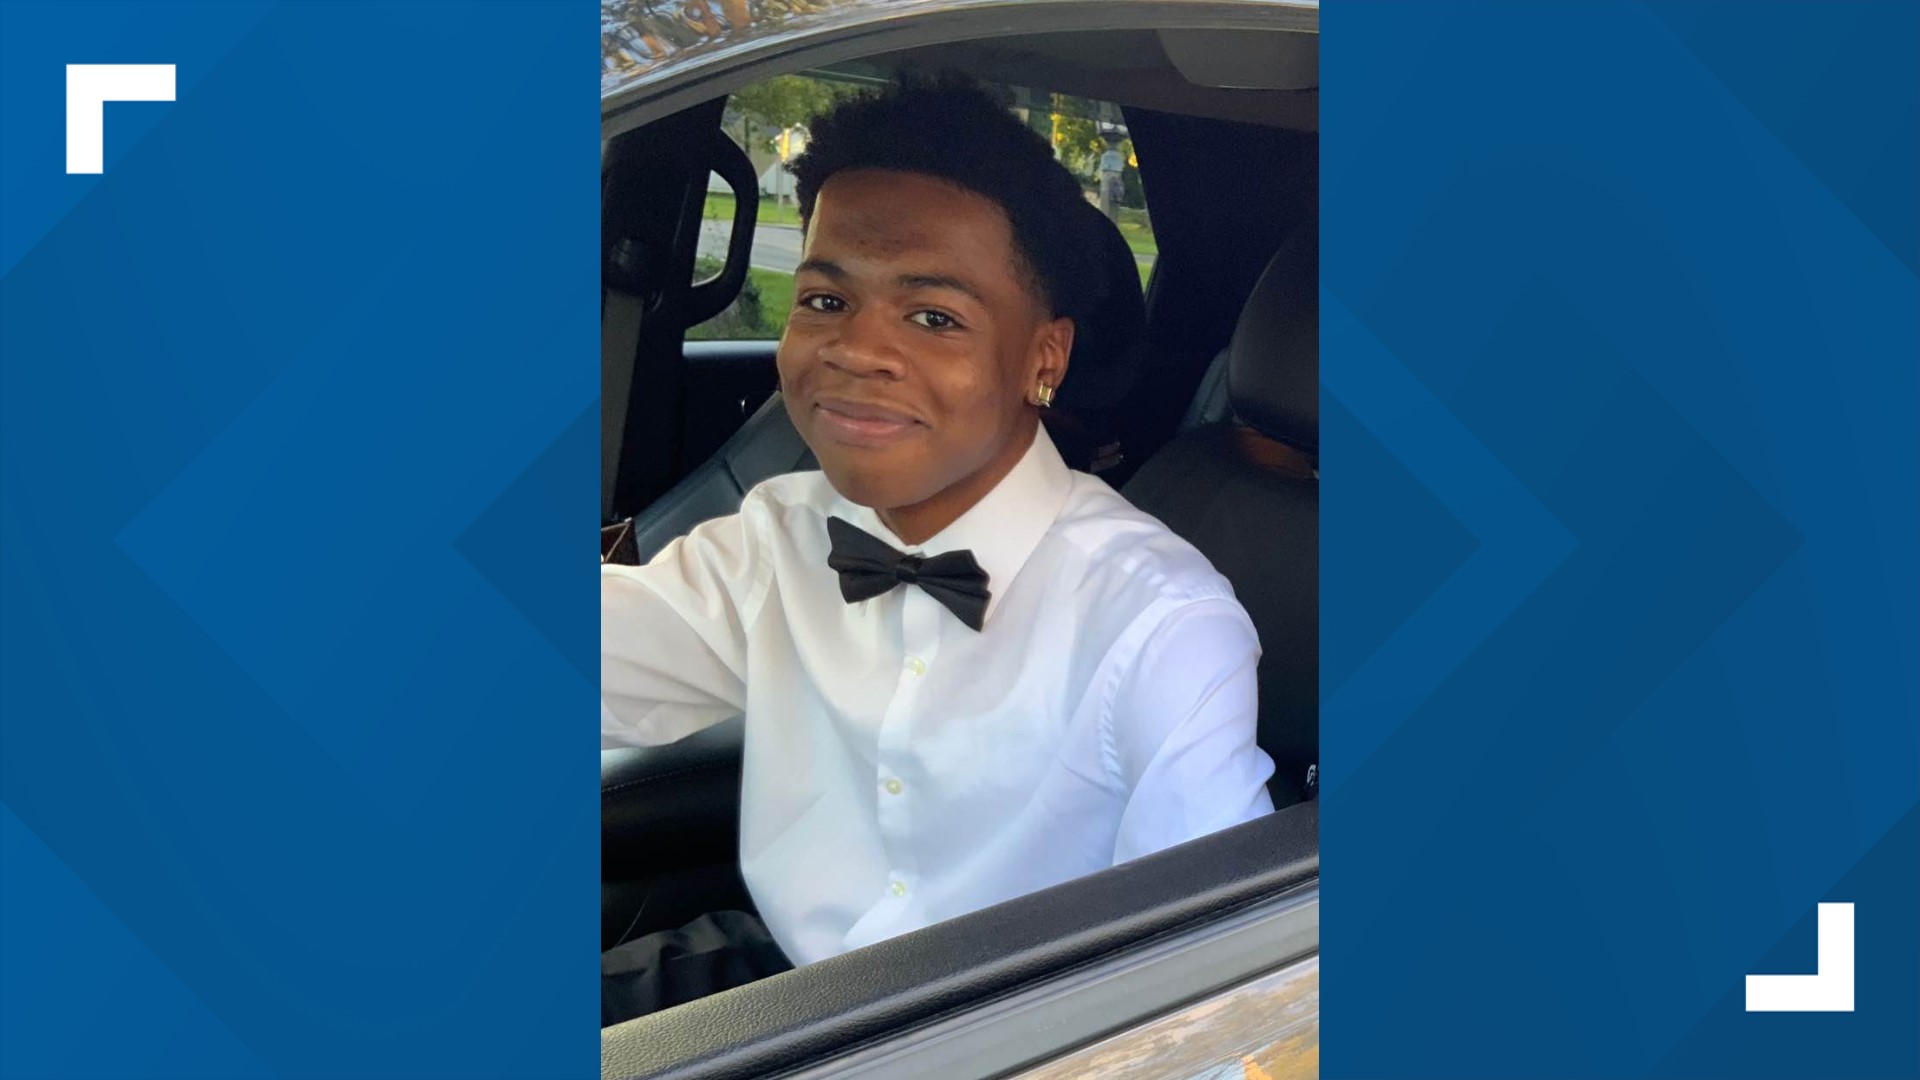 Officers located 16-year-old Broderick Harper on the Broad Street side of the front lawn and tried to resuscitate him before he was pronounced dead.